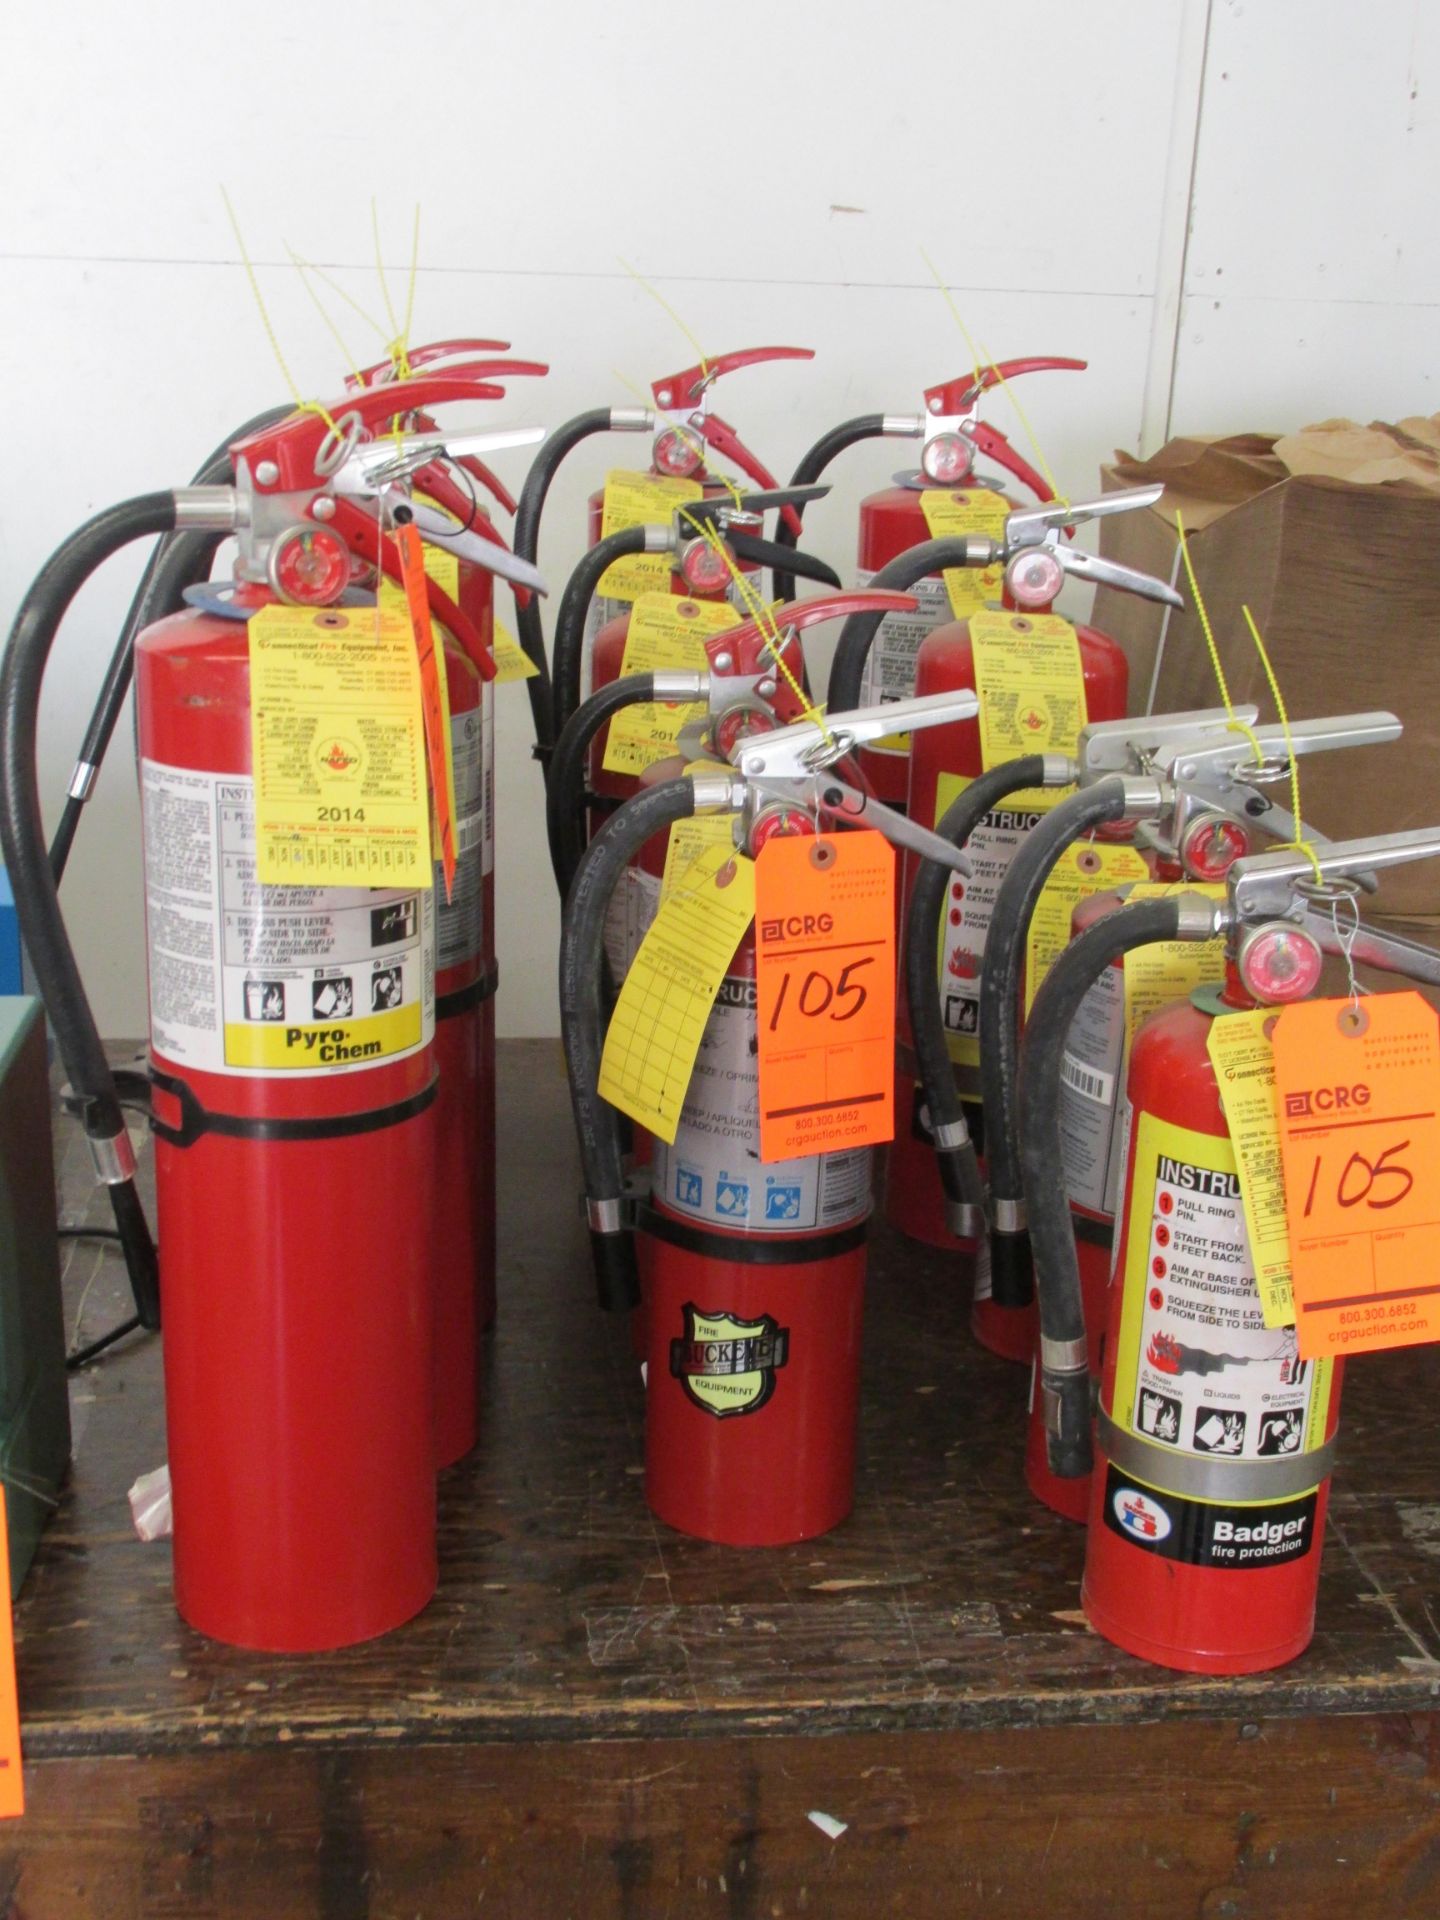 Lot of (14) ABC/dry chemical fire extinguishers by Badger, Buckeye, & Pyro-Chem Brands - assorted